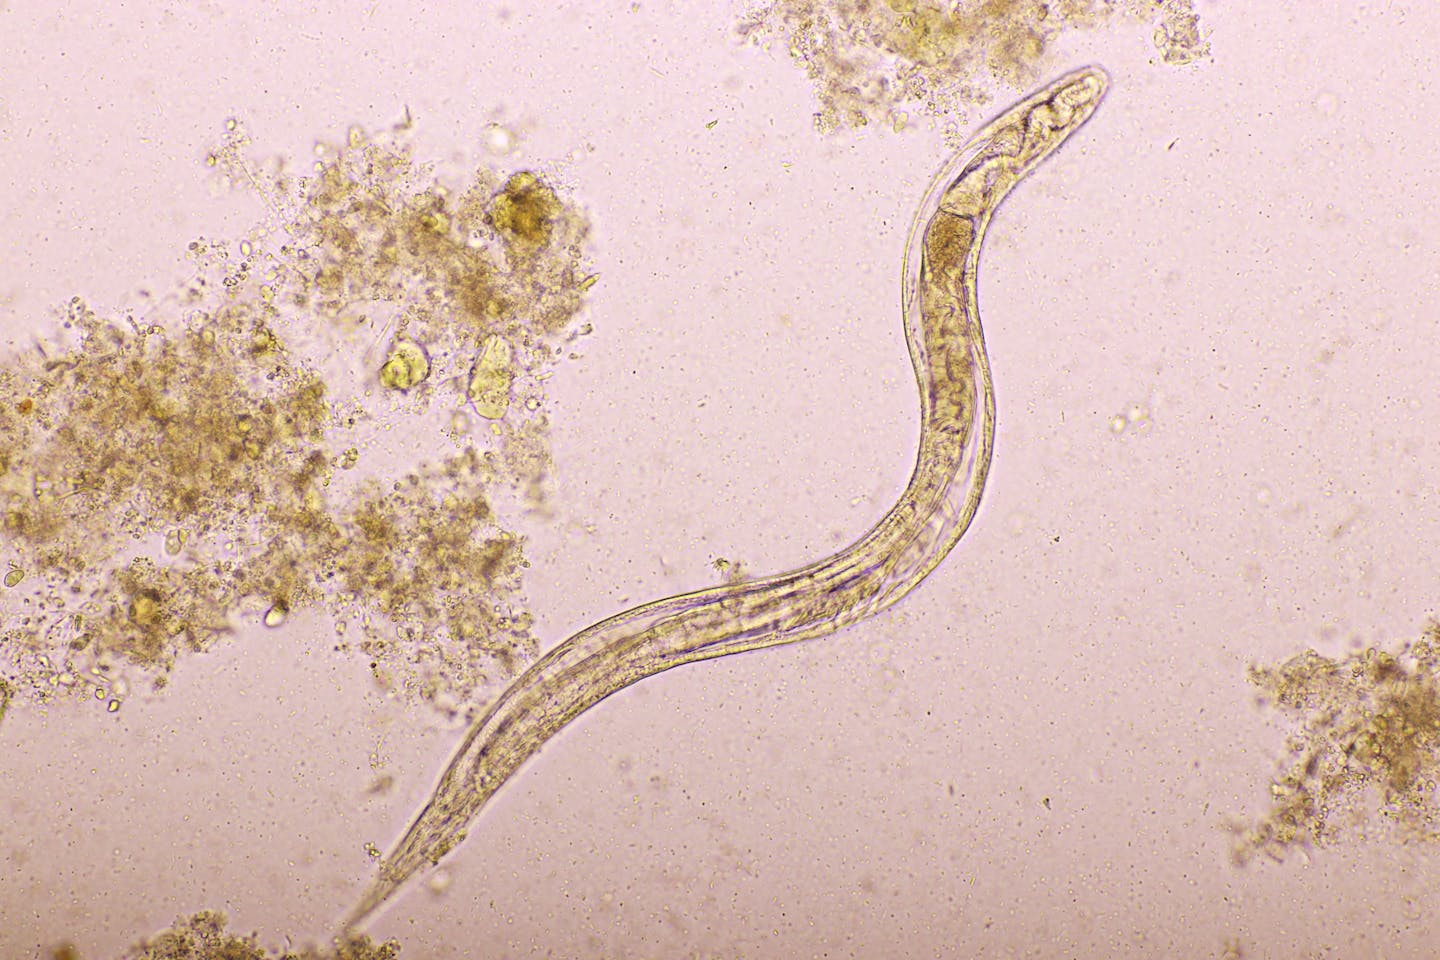 Microscopic image of strongyloides stercoralis in human stool